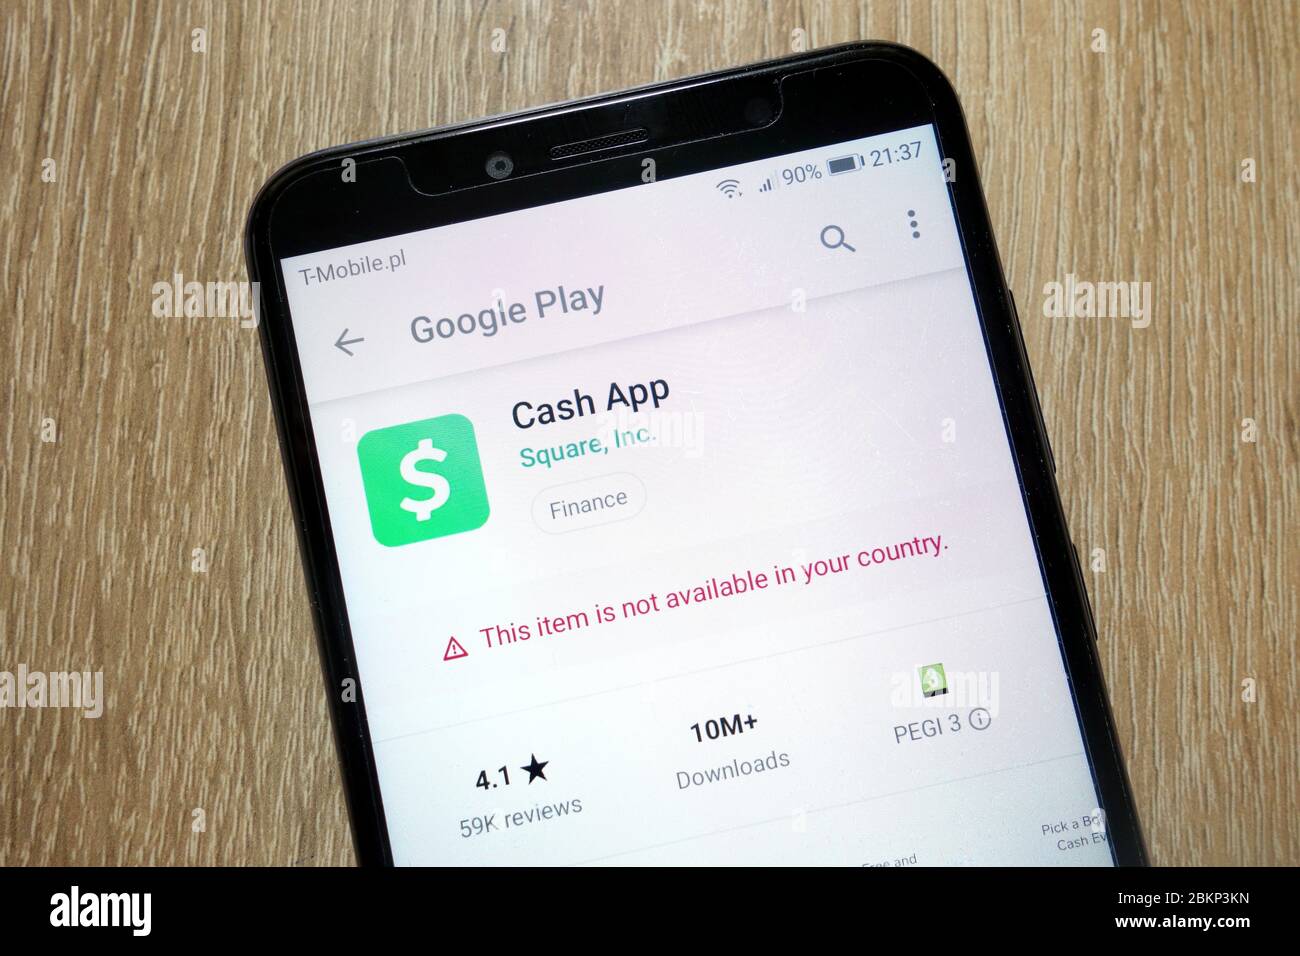 Square Cash app on Google Play Store website displayed on smartphone Stock Photo